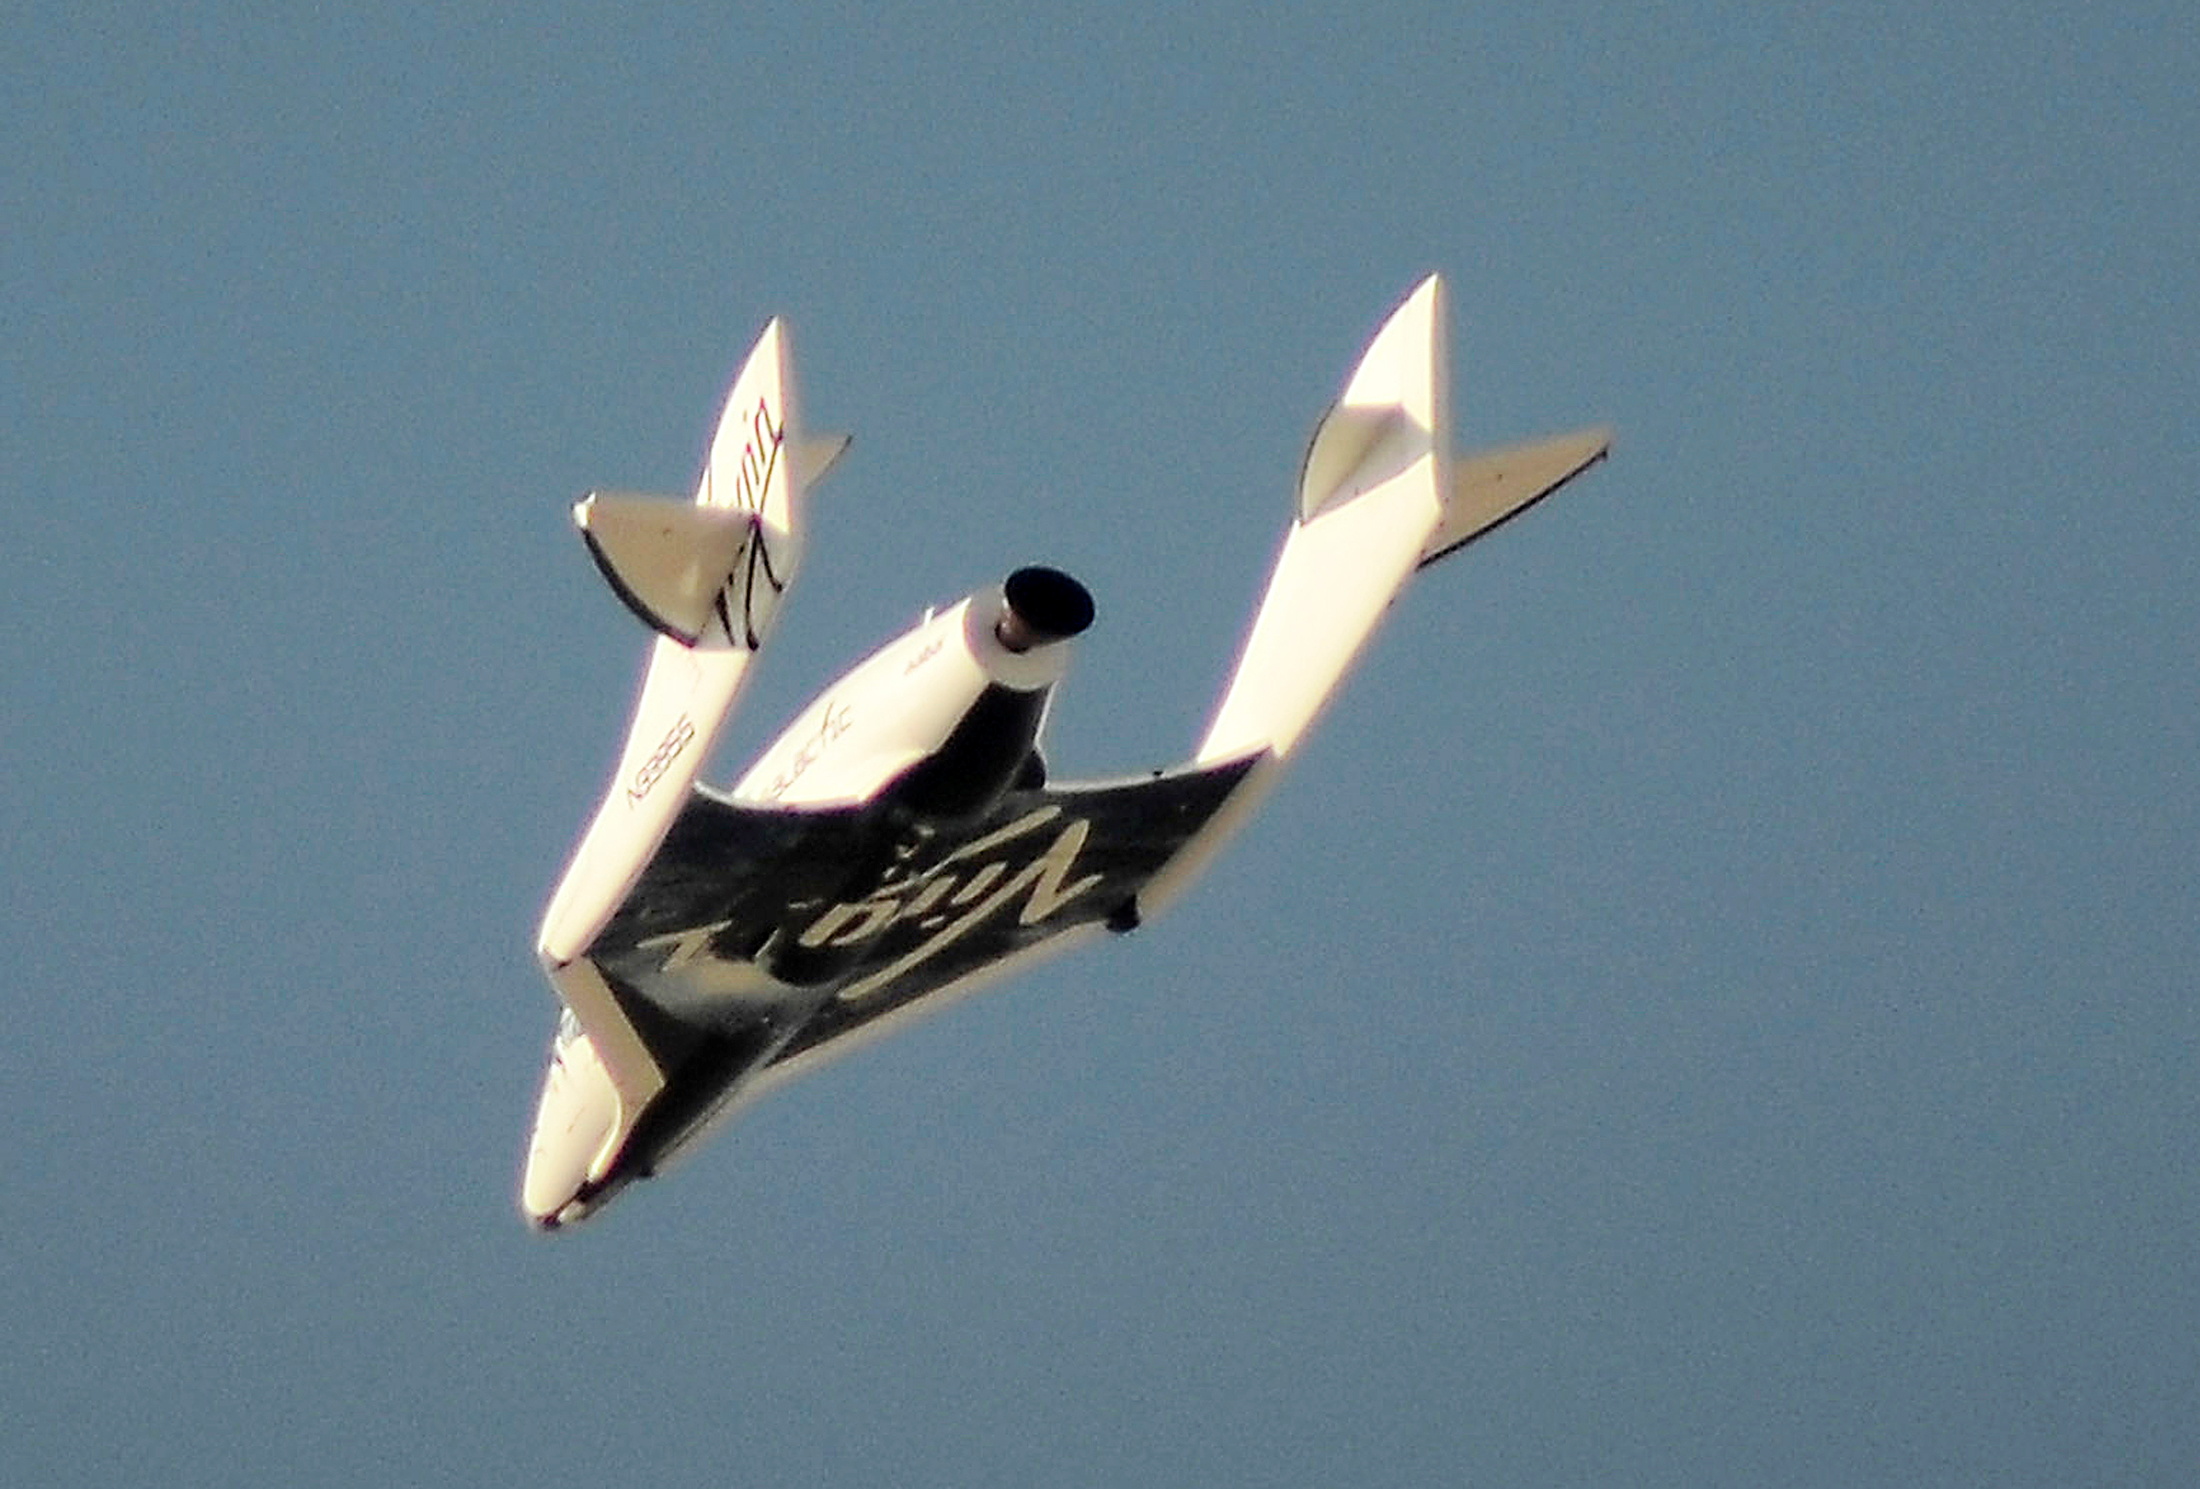 File photo of Virgin Galactic's SpaceShipTwo flies over the Mojave Desert shortly before successfully completing a test flight that broke the sound barrier